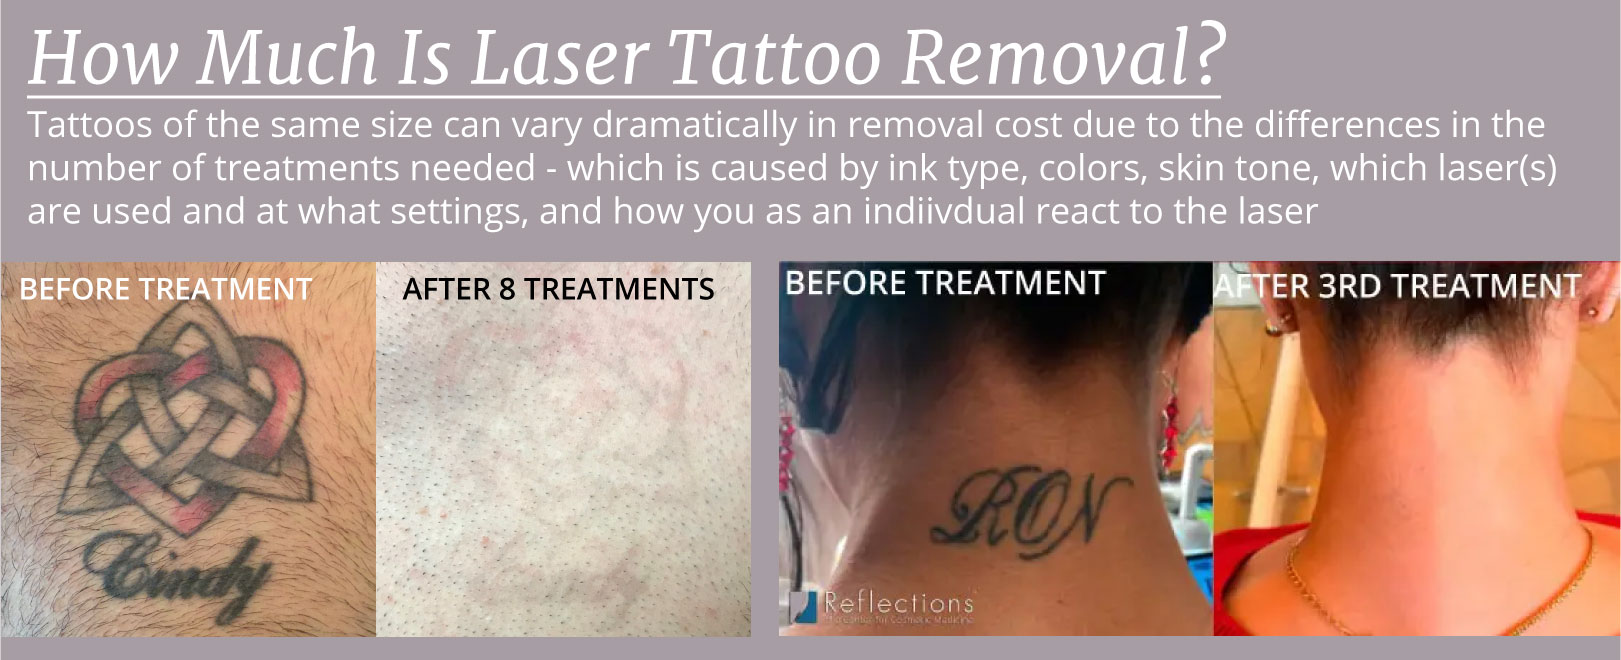 Reducing the Cost of Tattoo Removal: How to Maximize Your Laser Tattoo  Removal Treatments' Results - Reflections Center